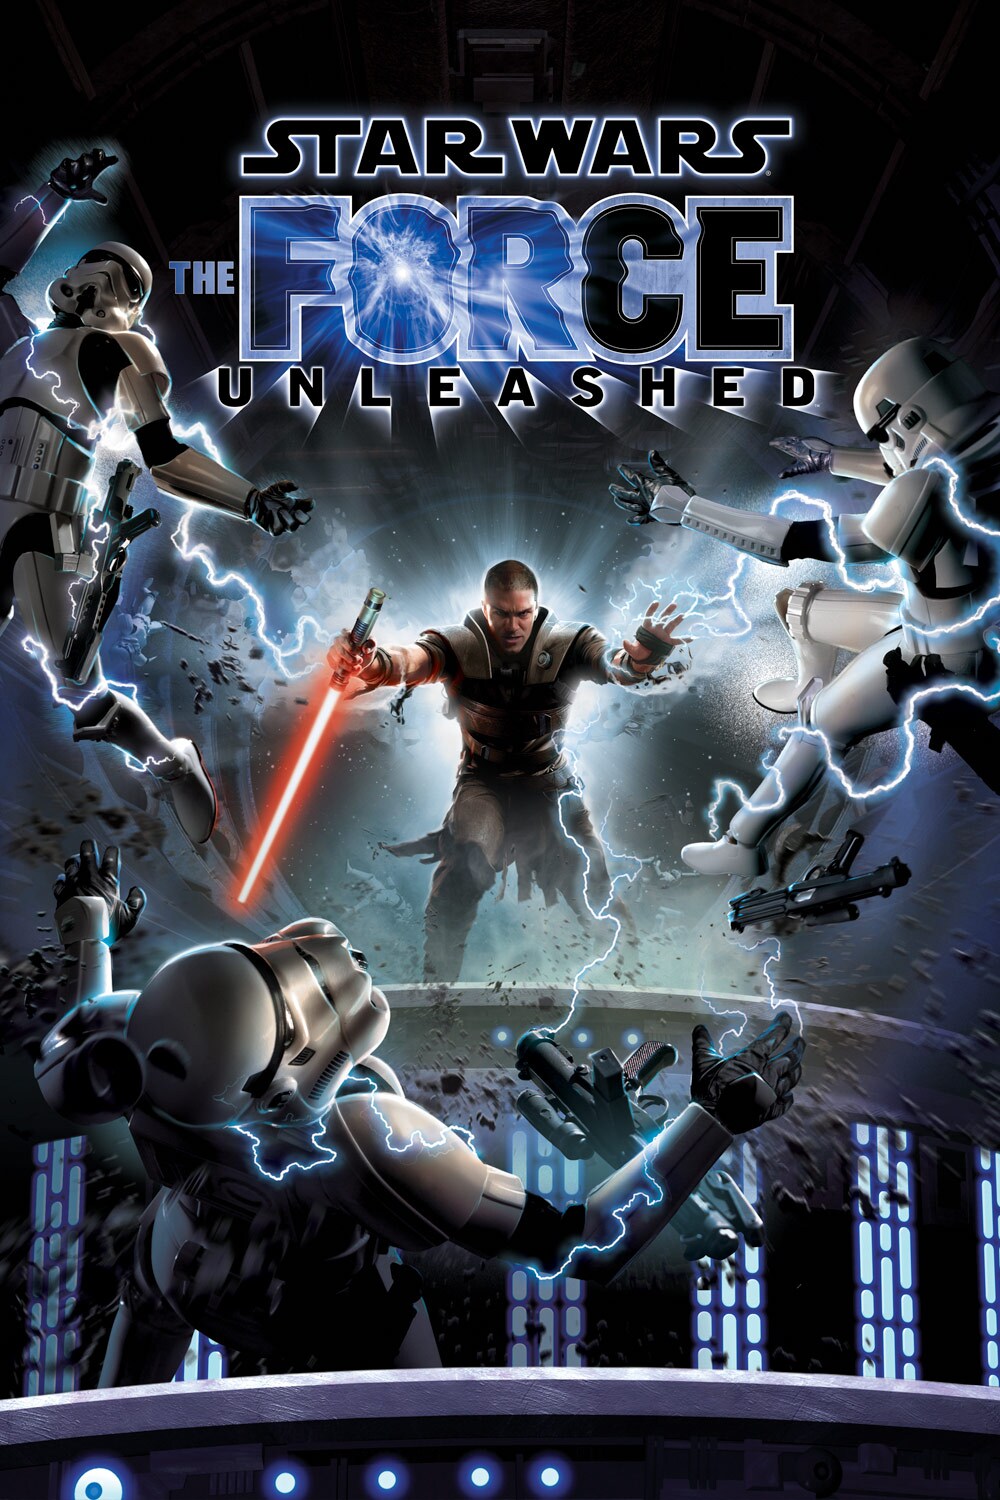 The-Force-Unleashed-Poster_4f2601ea.jpeg